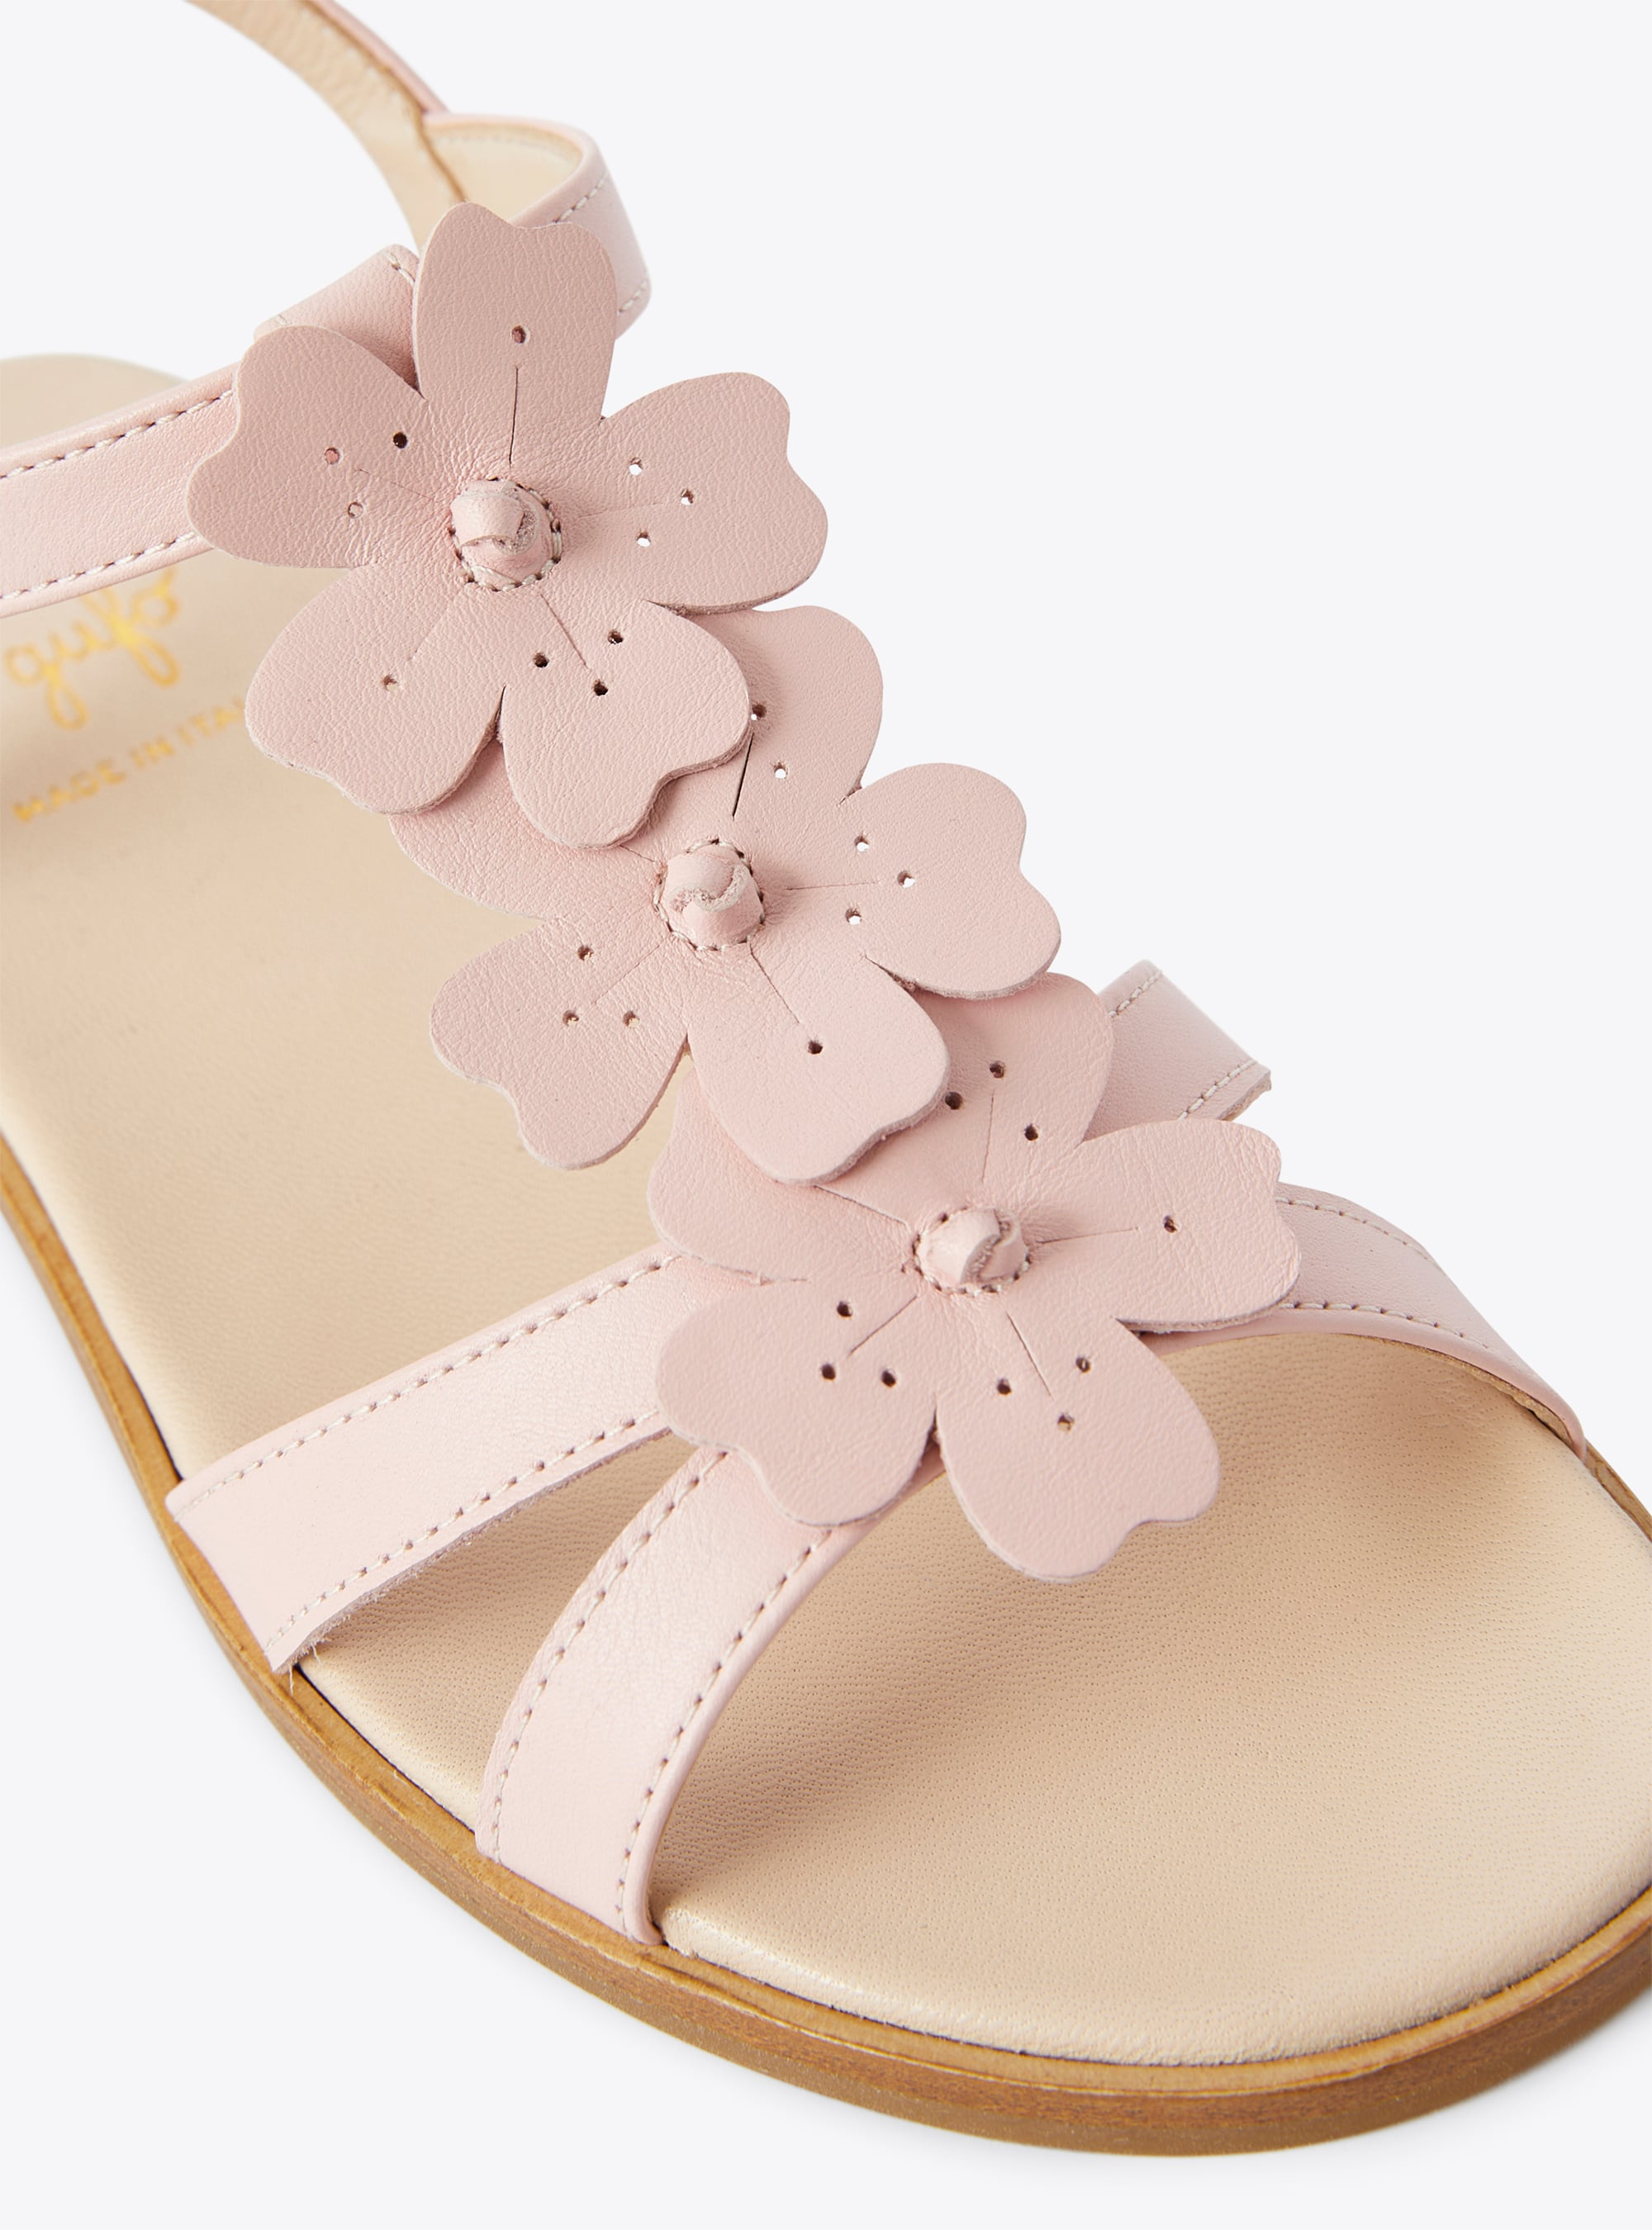 Leather sandal with flower embellishment in pink - Pink | Il Gufo